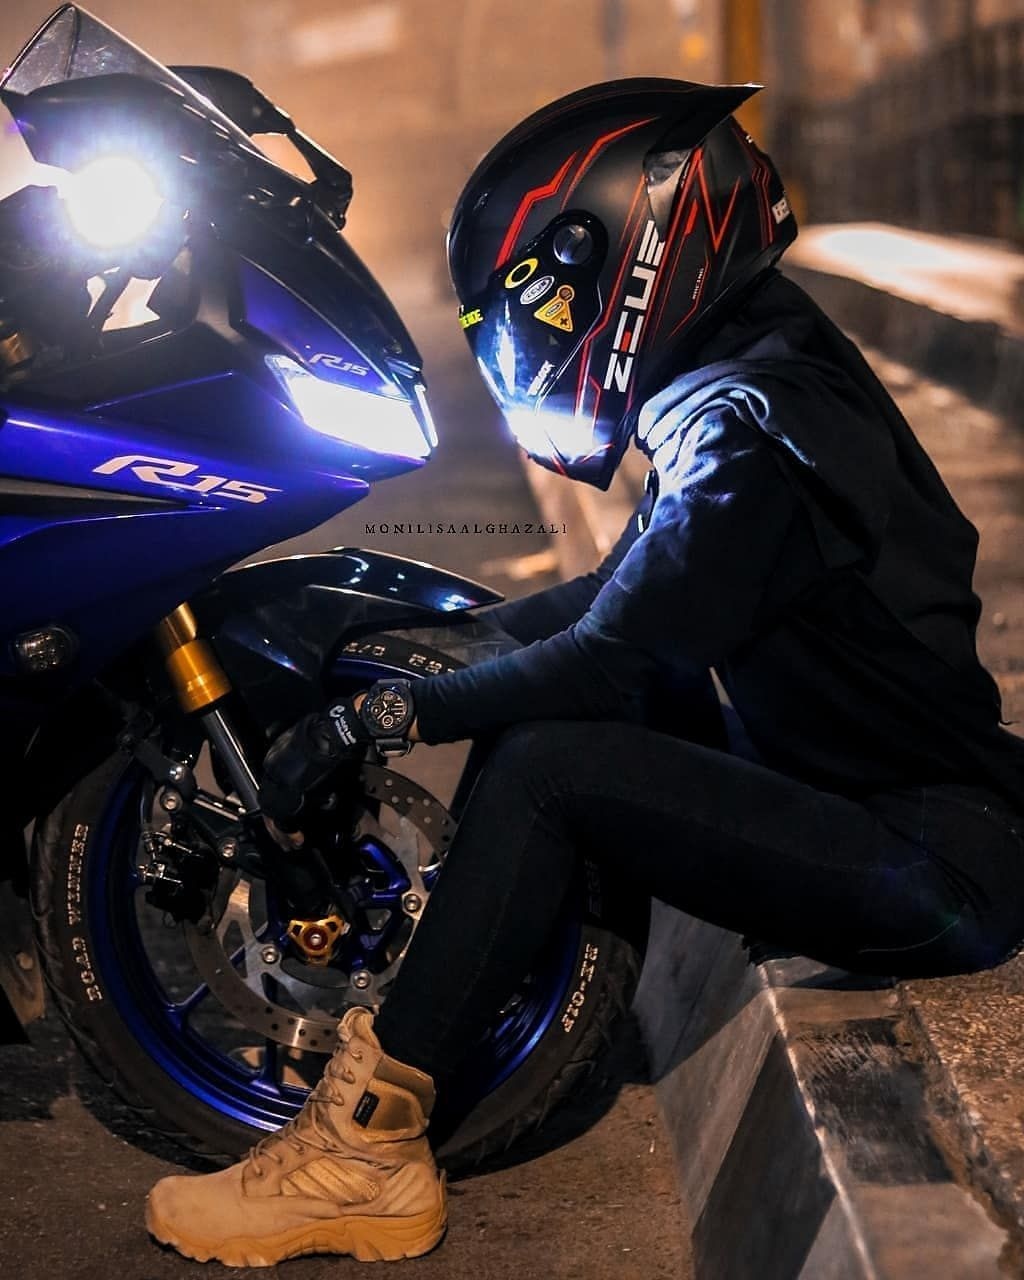 Bike Rider Images Wallpapers